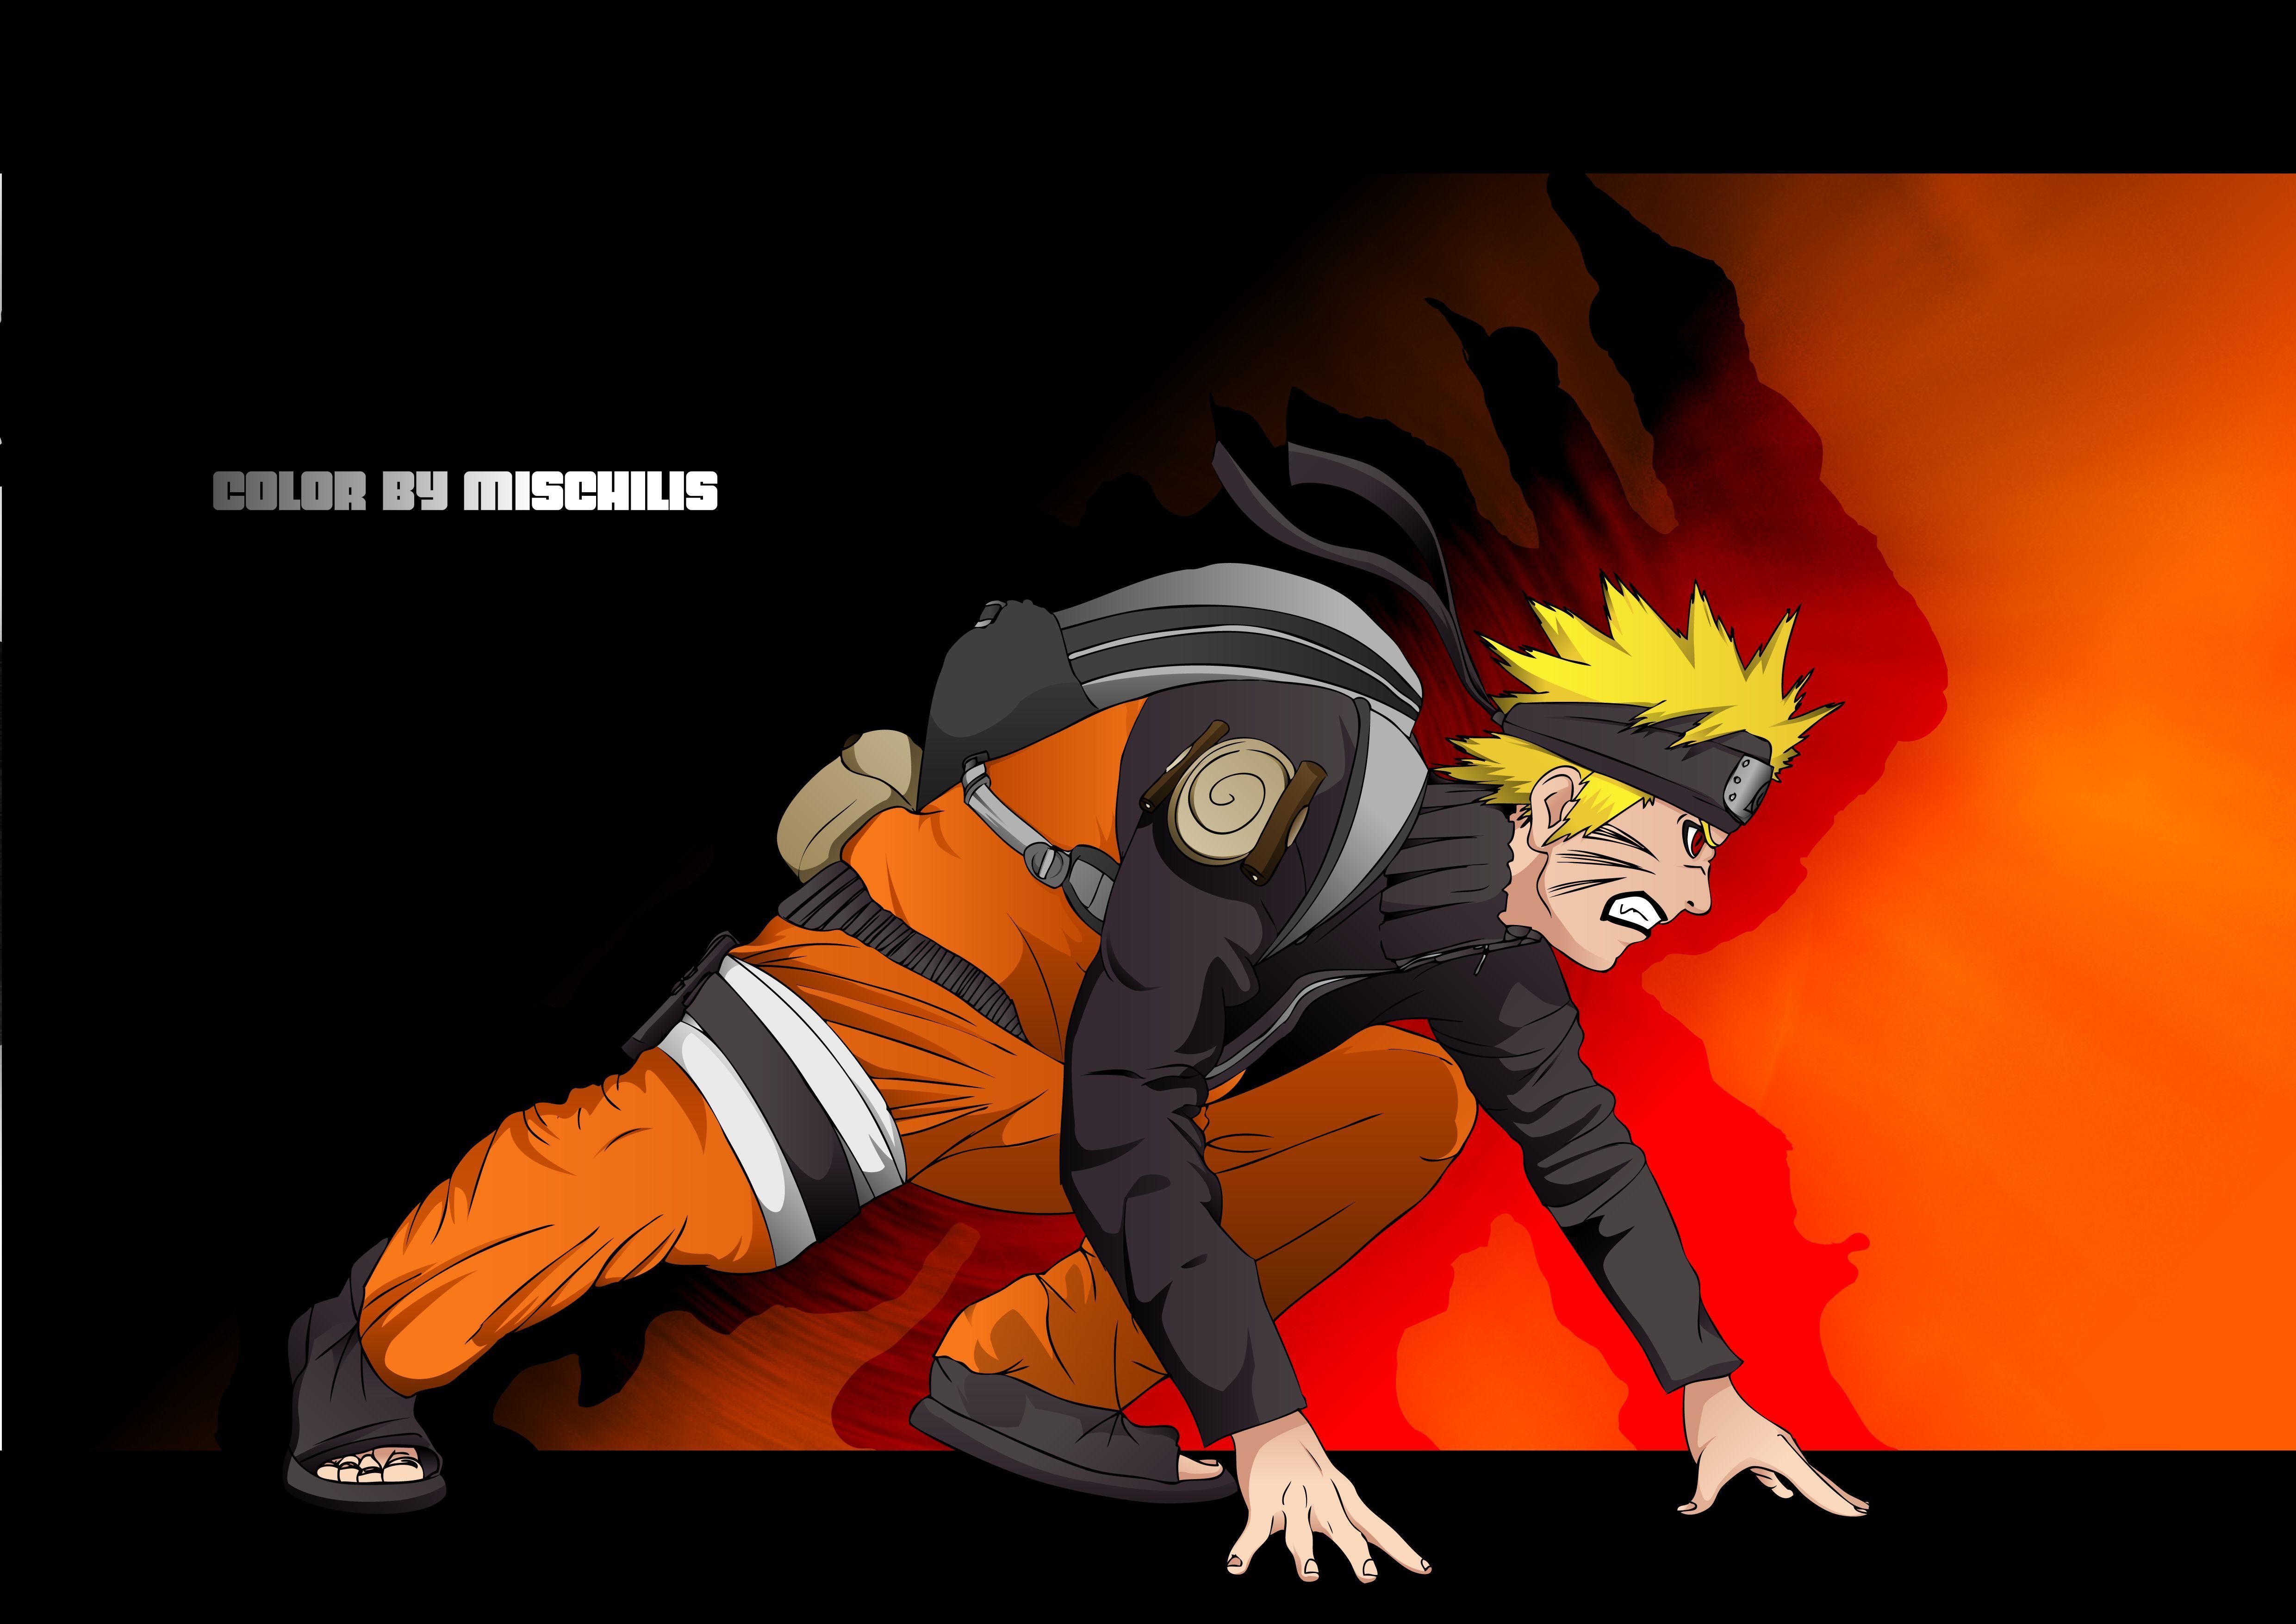 New Great Full HD Naruto WallpaperS - ANIME ATTACK